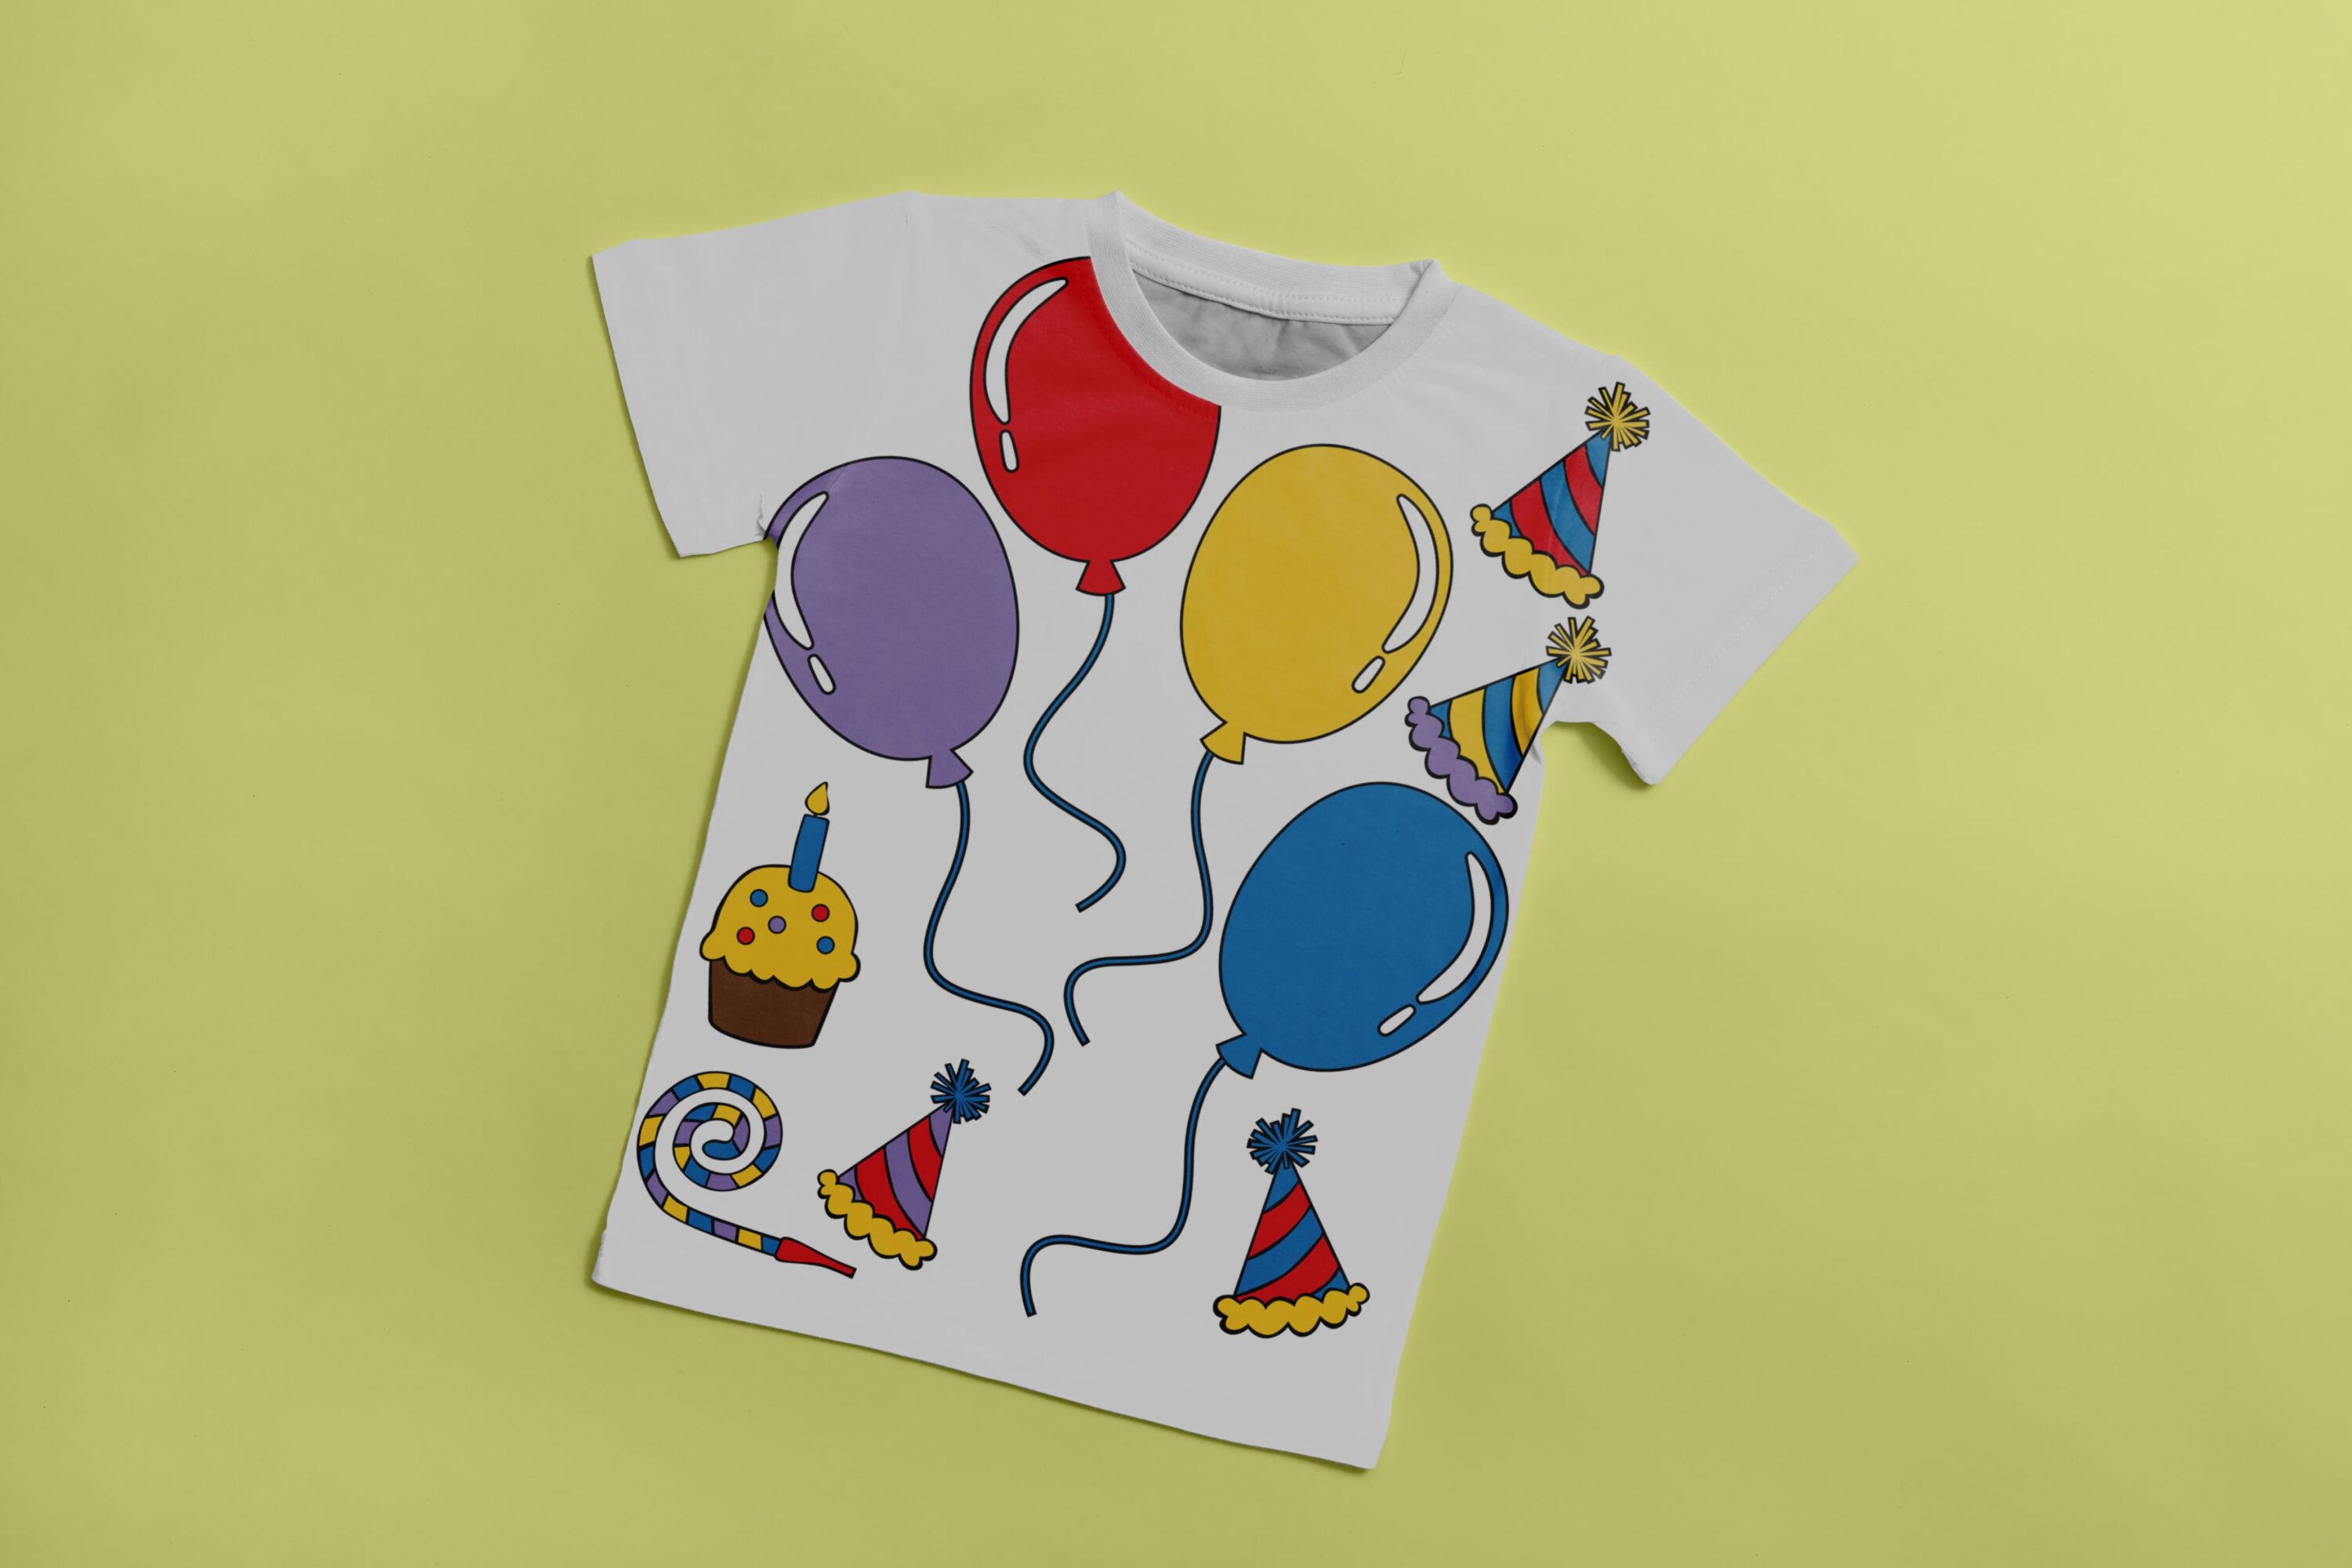 White T-shirt with lavender, red, yellow and blue balloons, 4 party hats, party cake and birthday whistle.